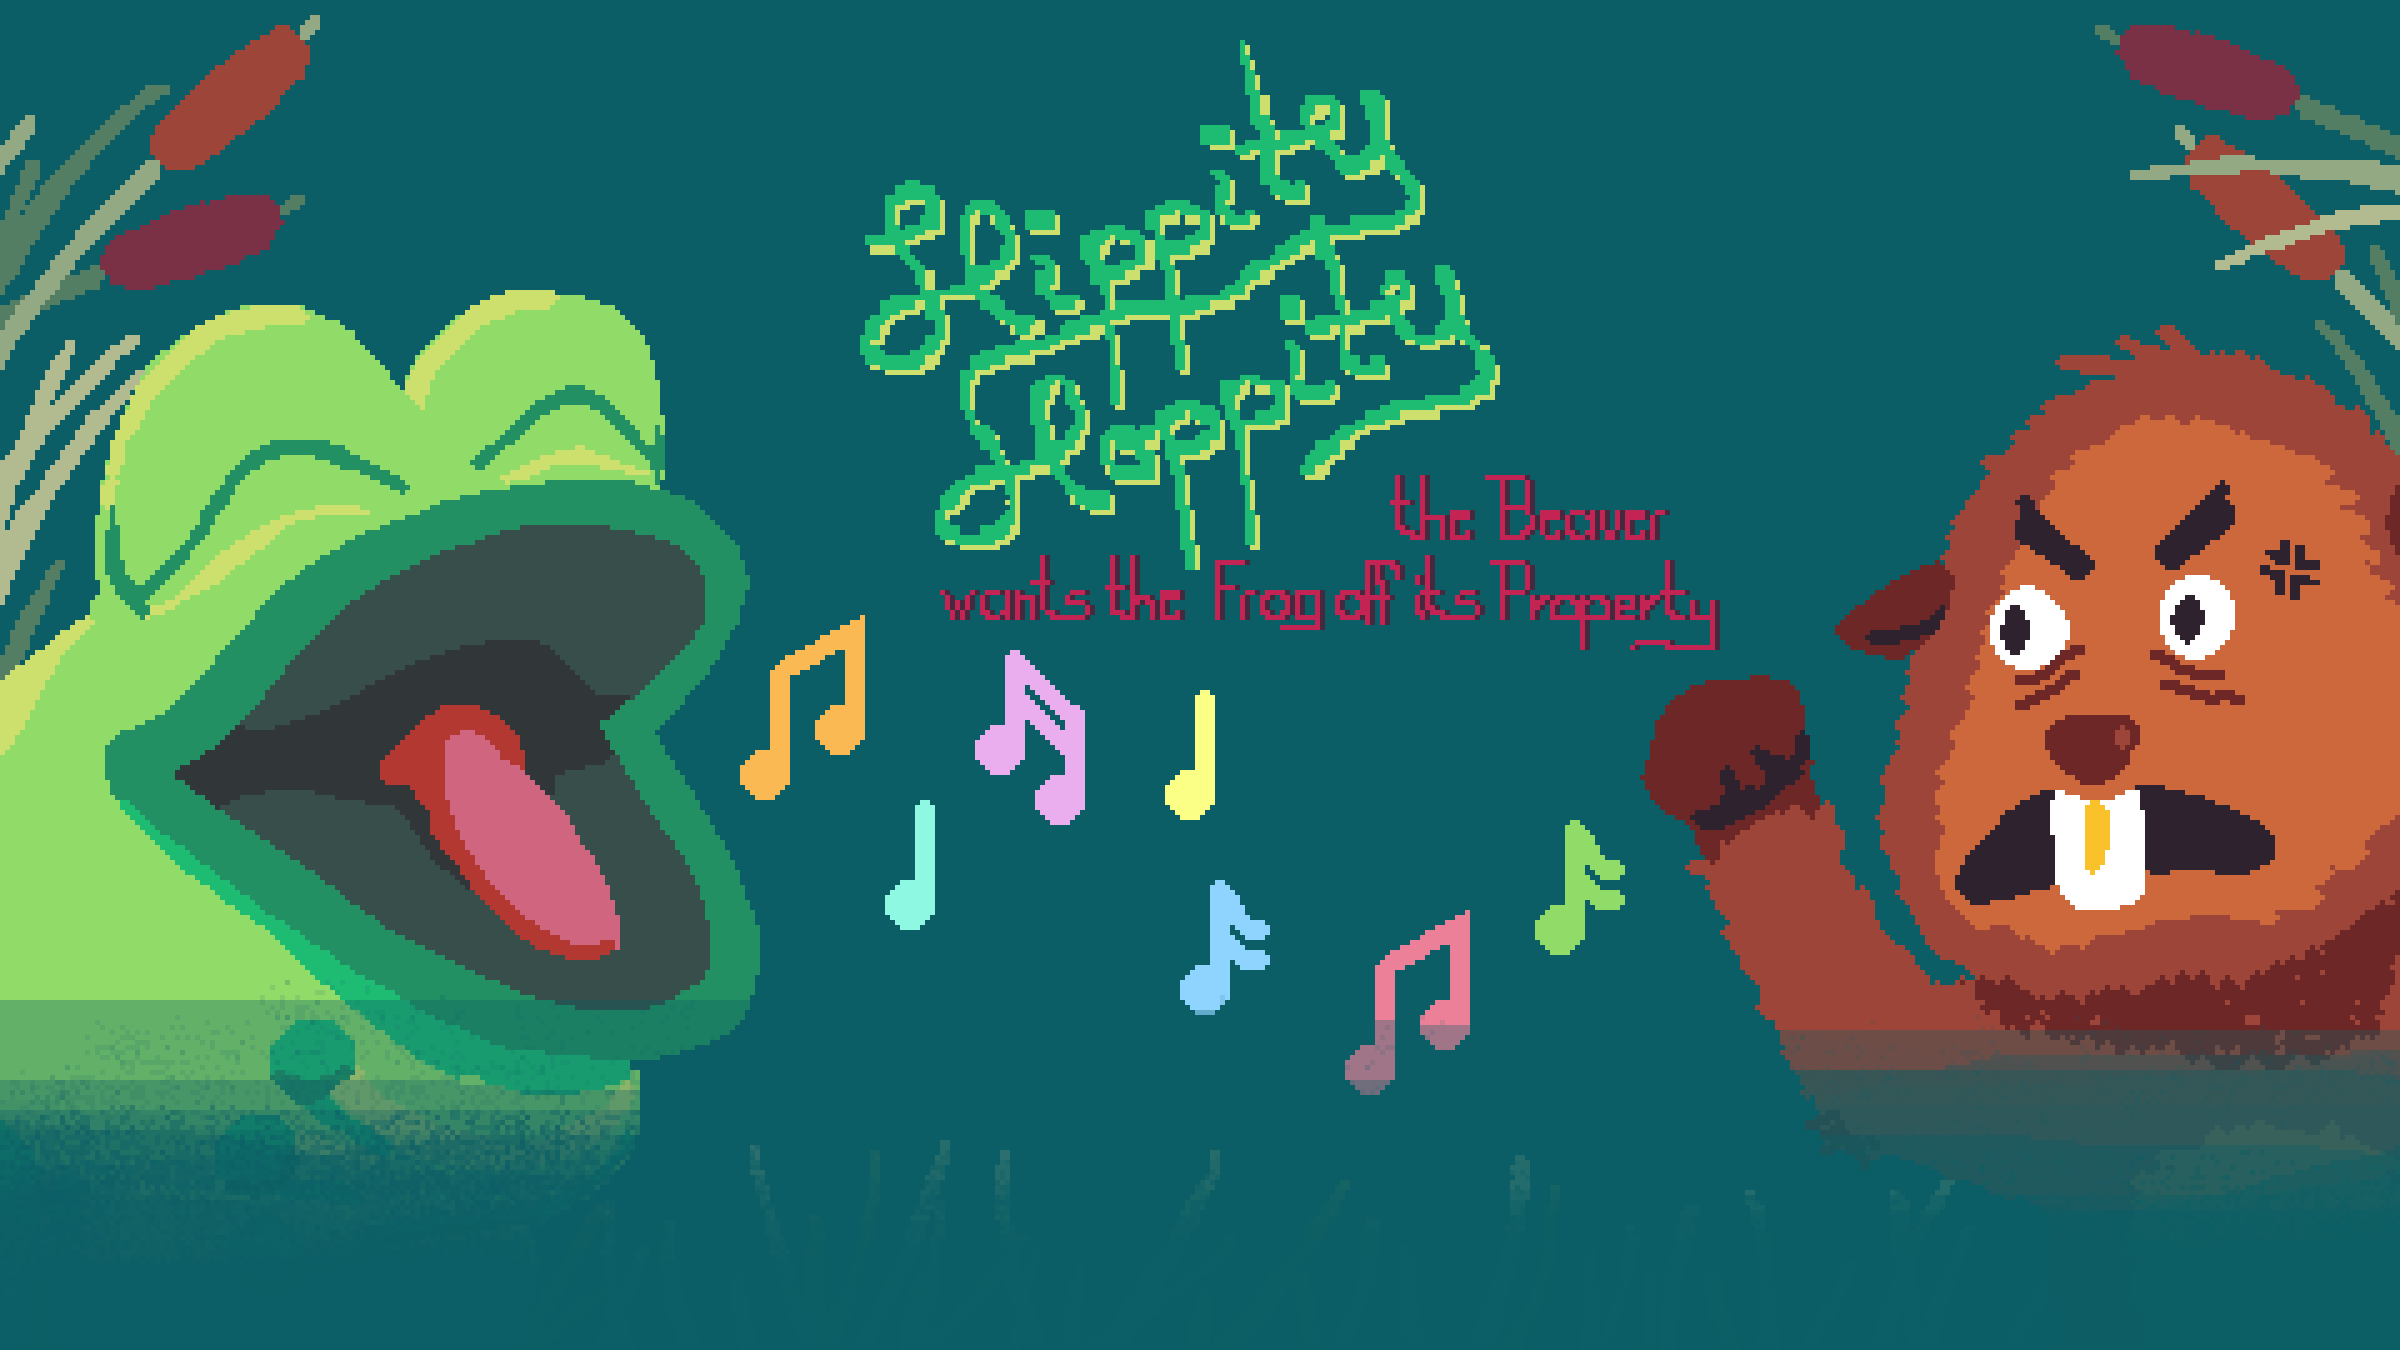 Hippity Hoppity - the Beaver wants the Frog off its Property